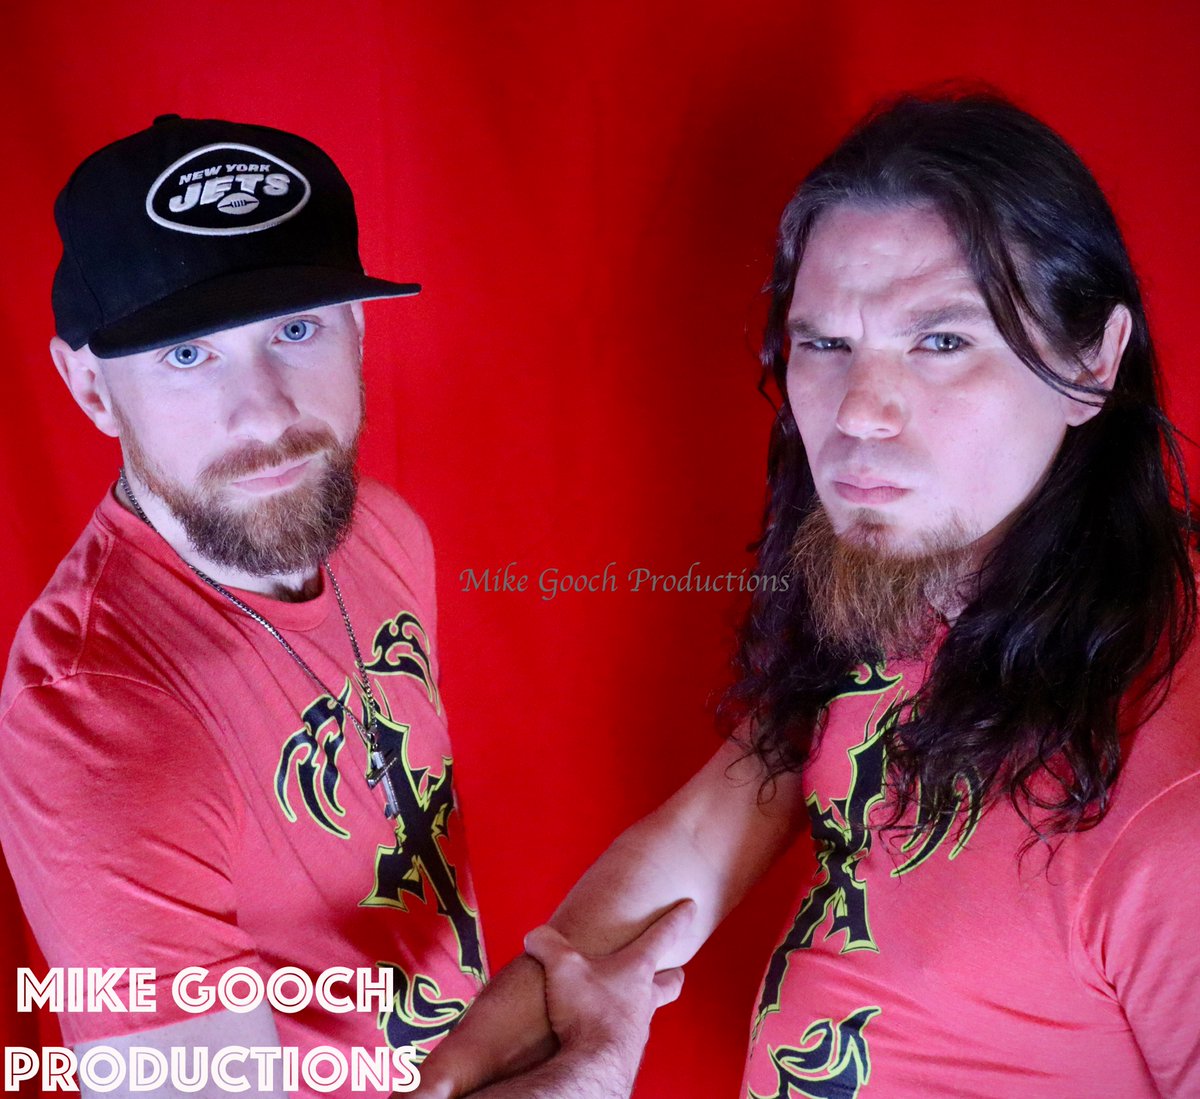 Project Codename Wrestling by #MikeGoochProductions #photography #nycphotographer #FollowThisPhotoGuy #wrestling #indyWrestling #ringsidephotography #SHARETHISPOST #NewJersey #SSW #WWERaw #SmackDown #PROjectCodeNameWrestling #AEWDynasty @PROject_CW #photoshoot #Assemble